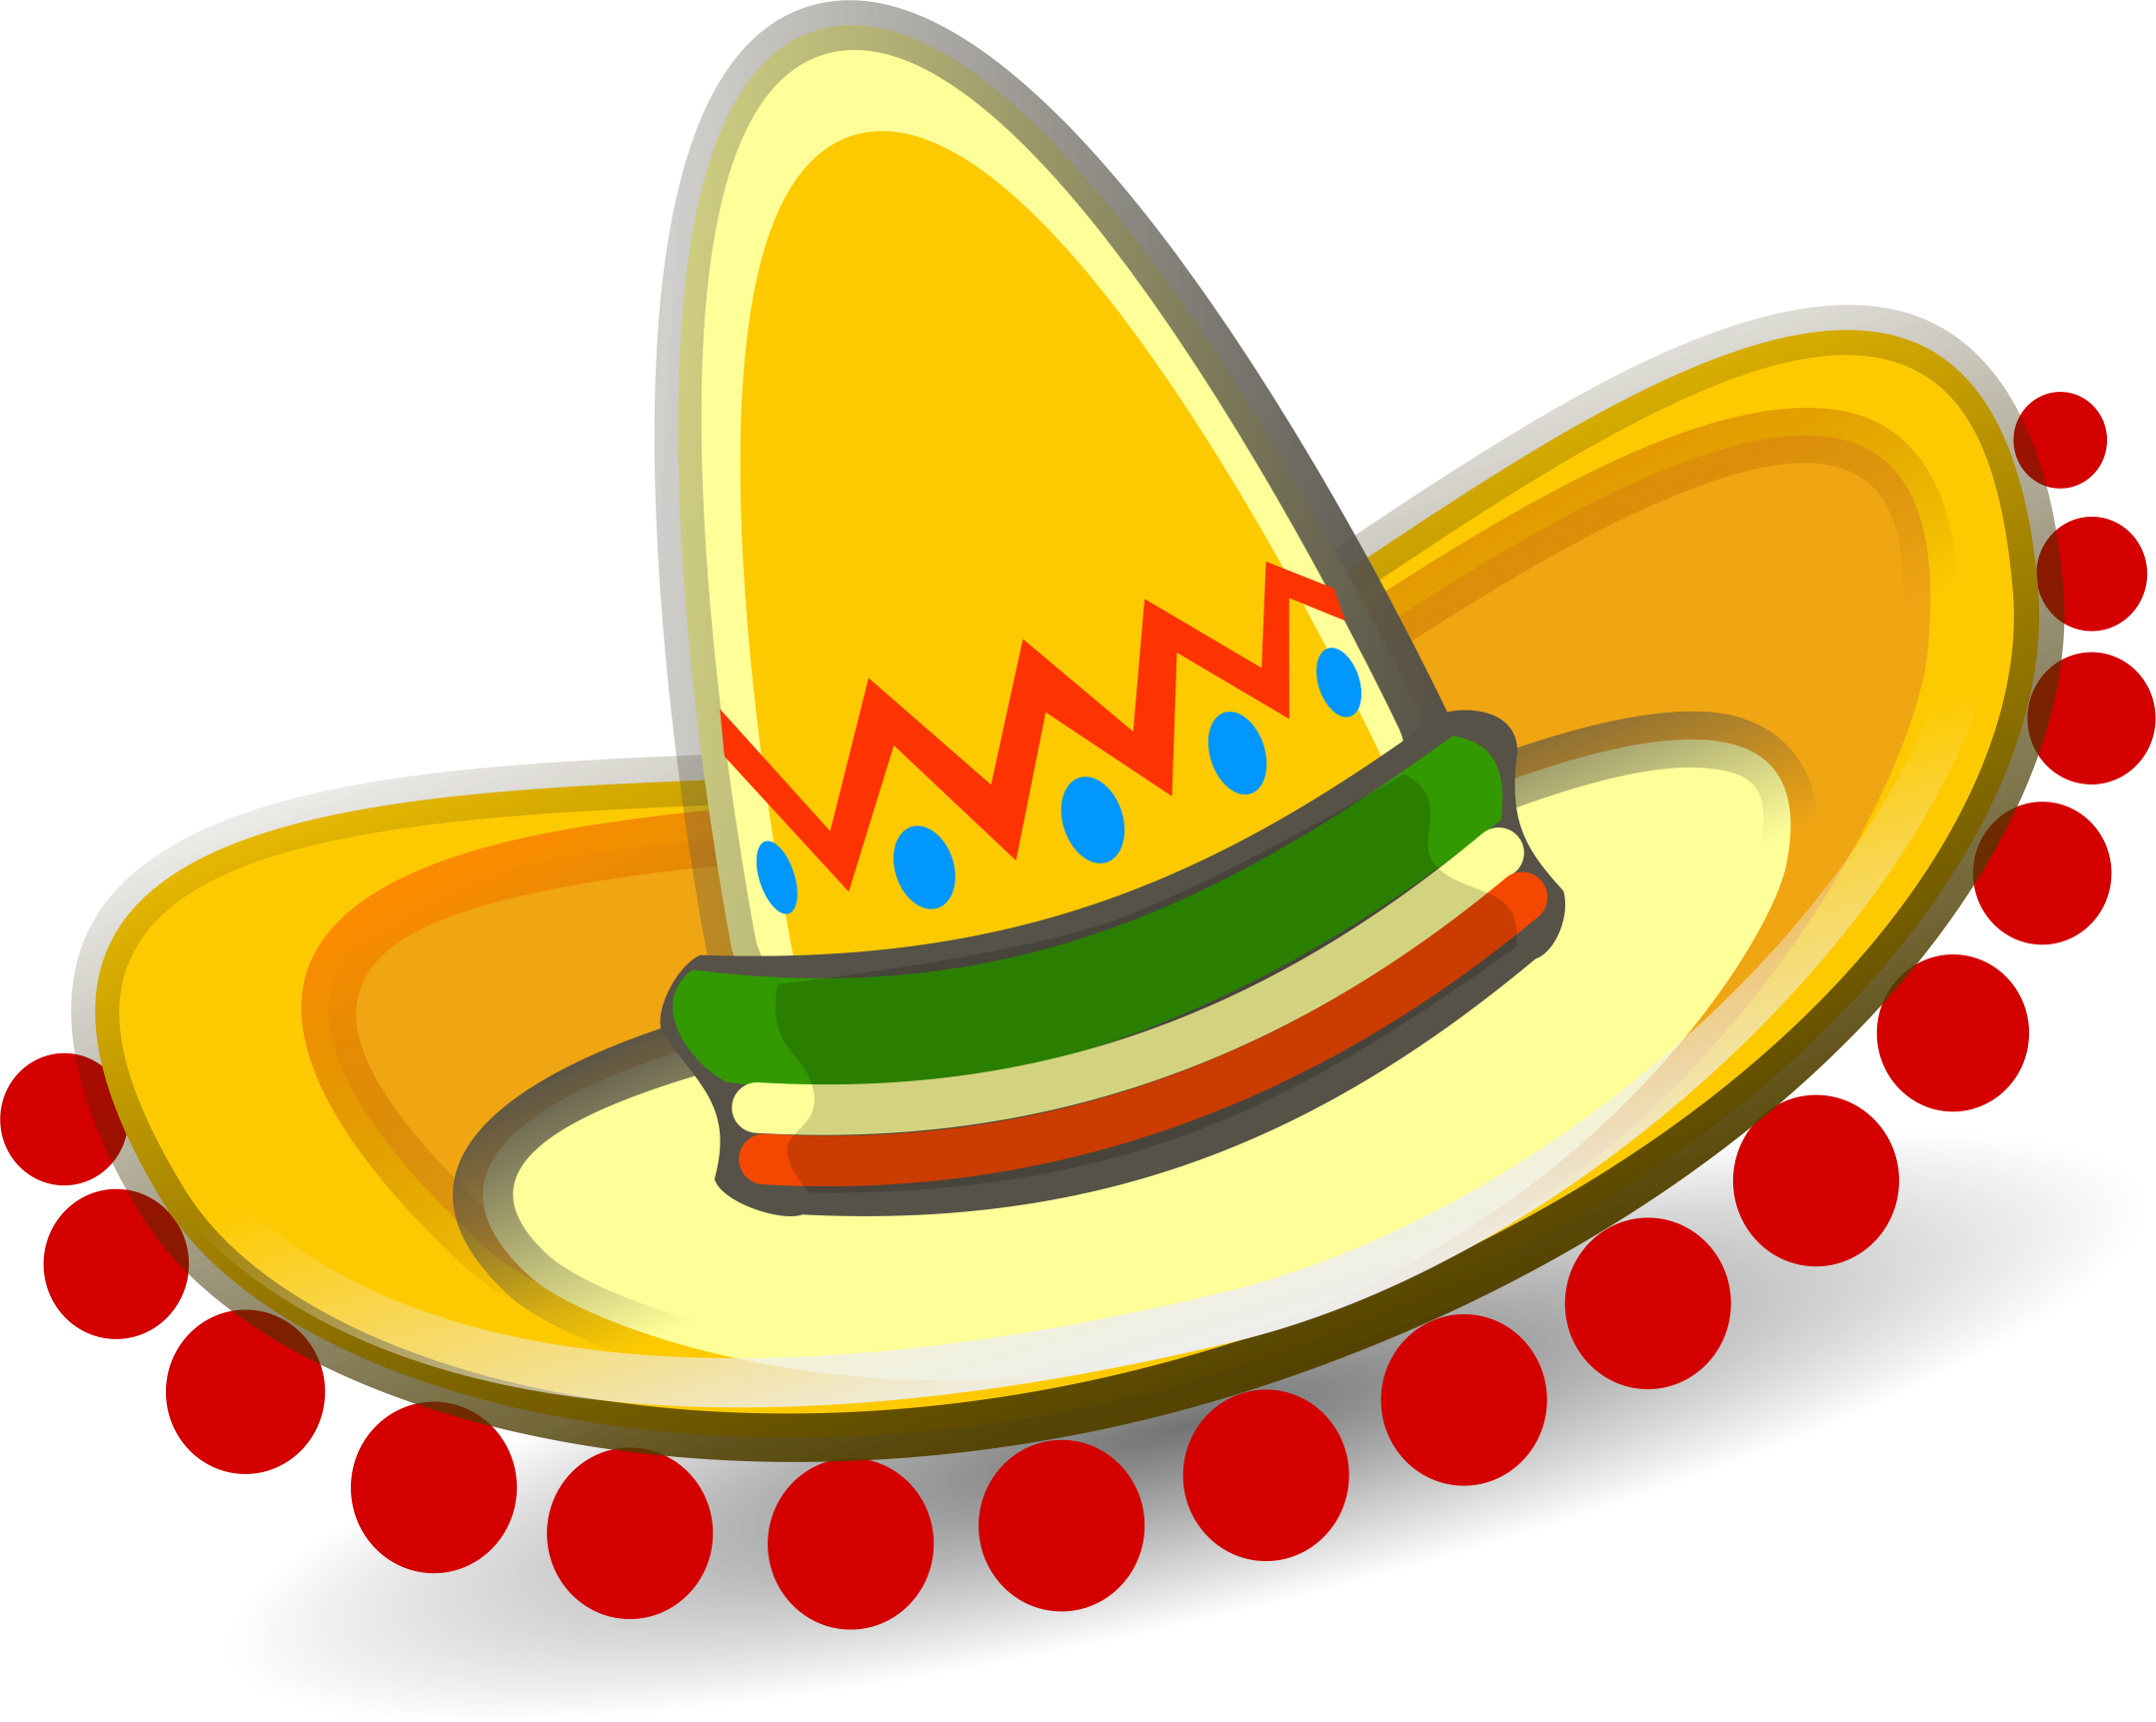 Pin by heather satterfield. Mustache clipart sombrero